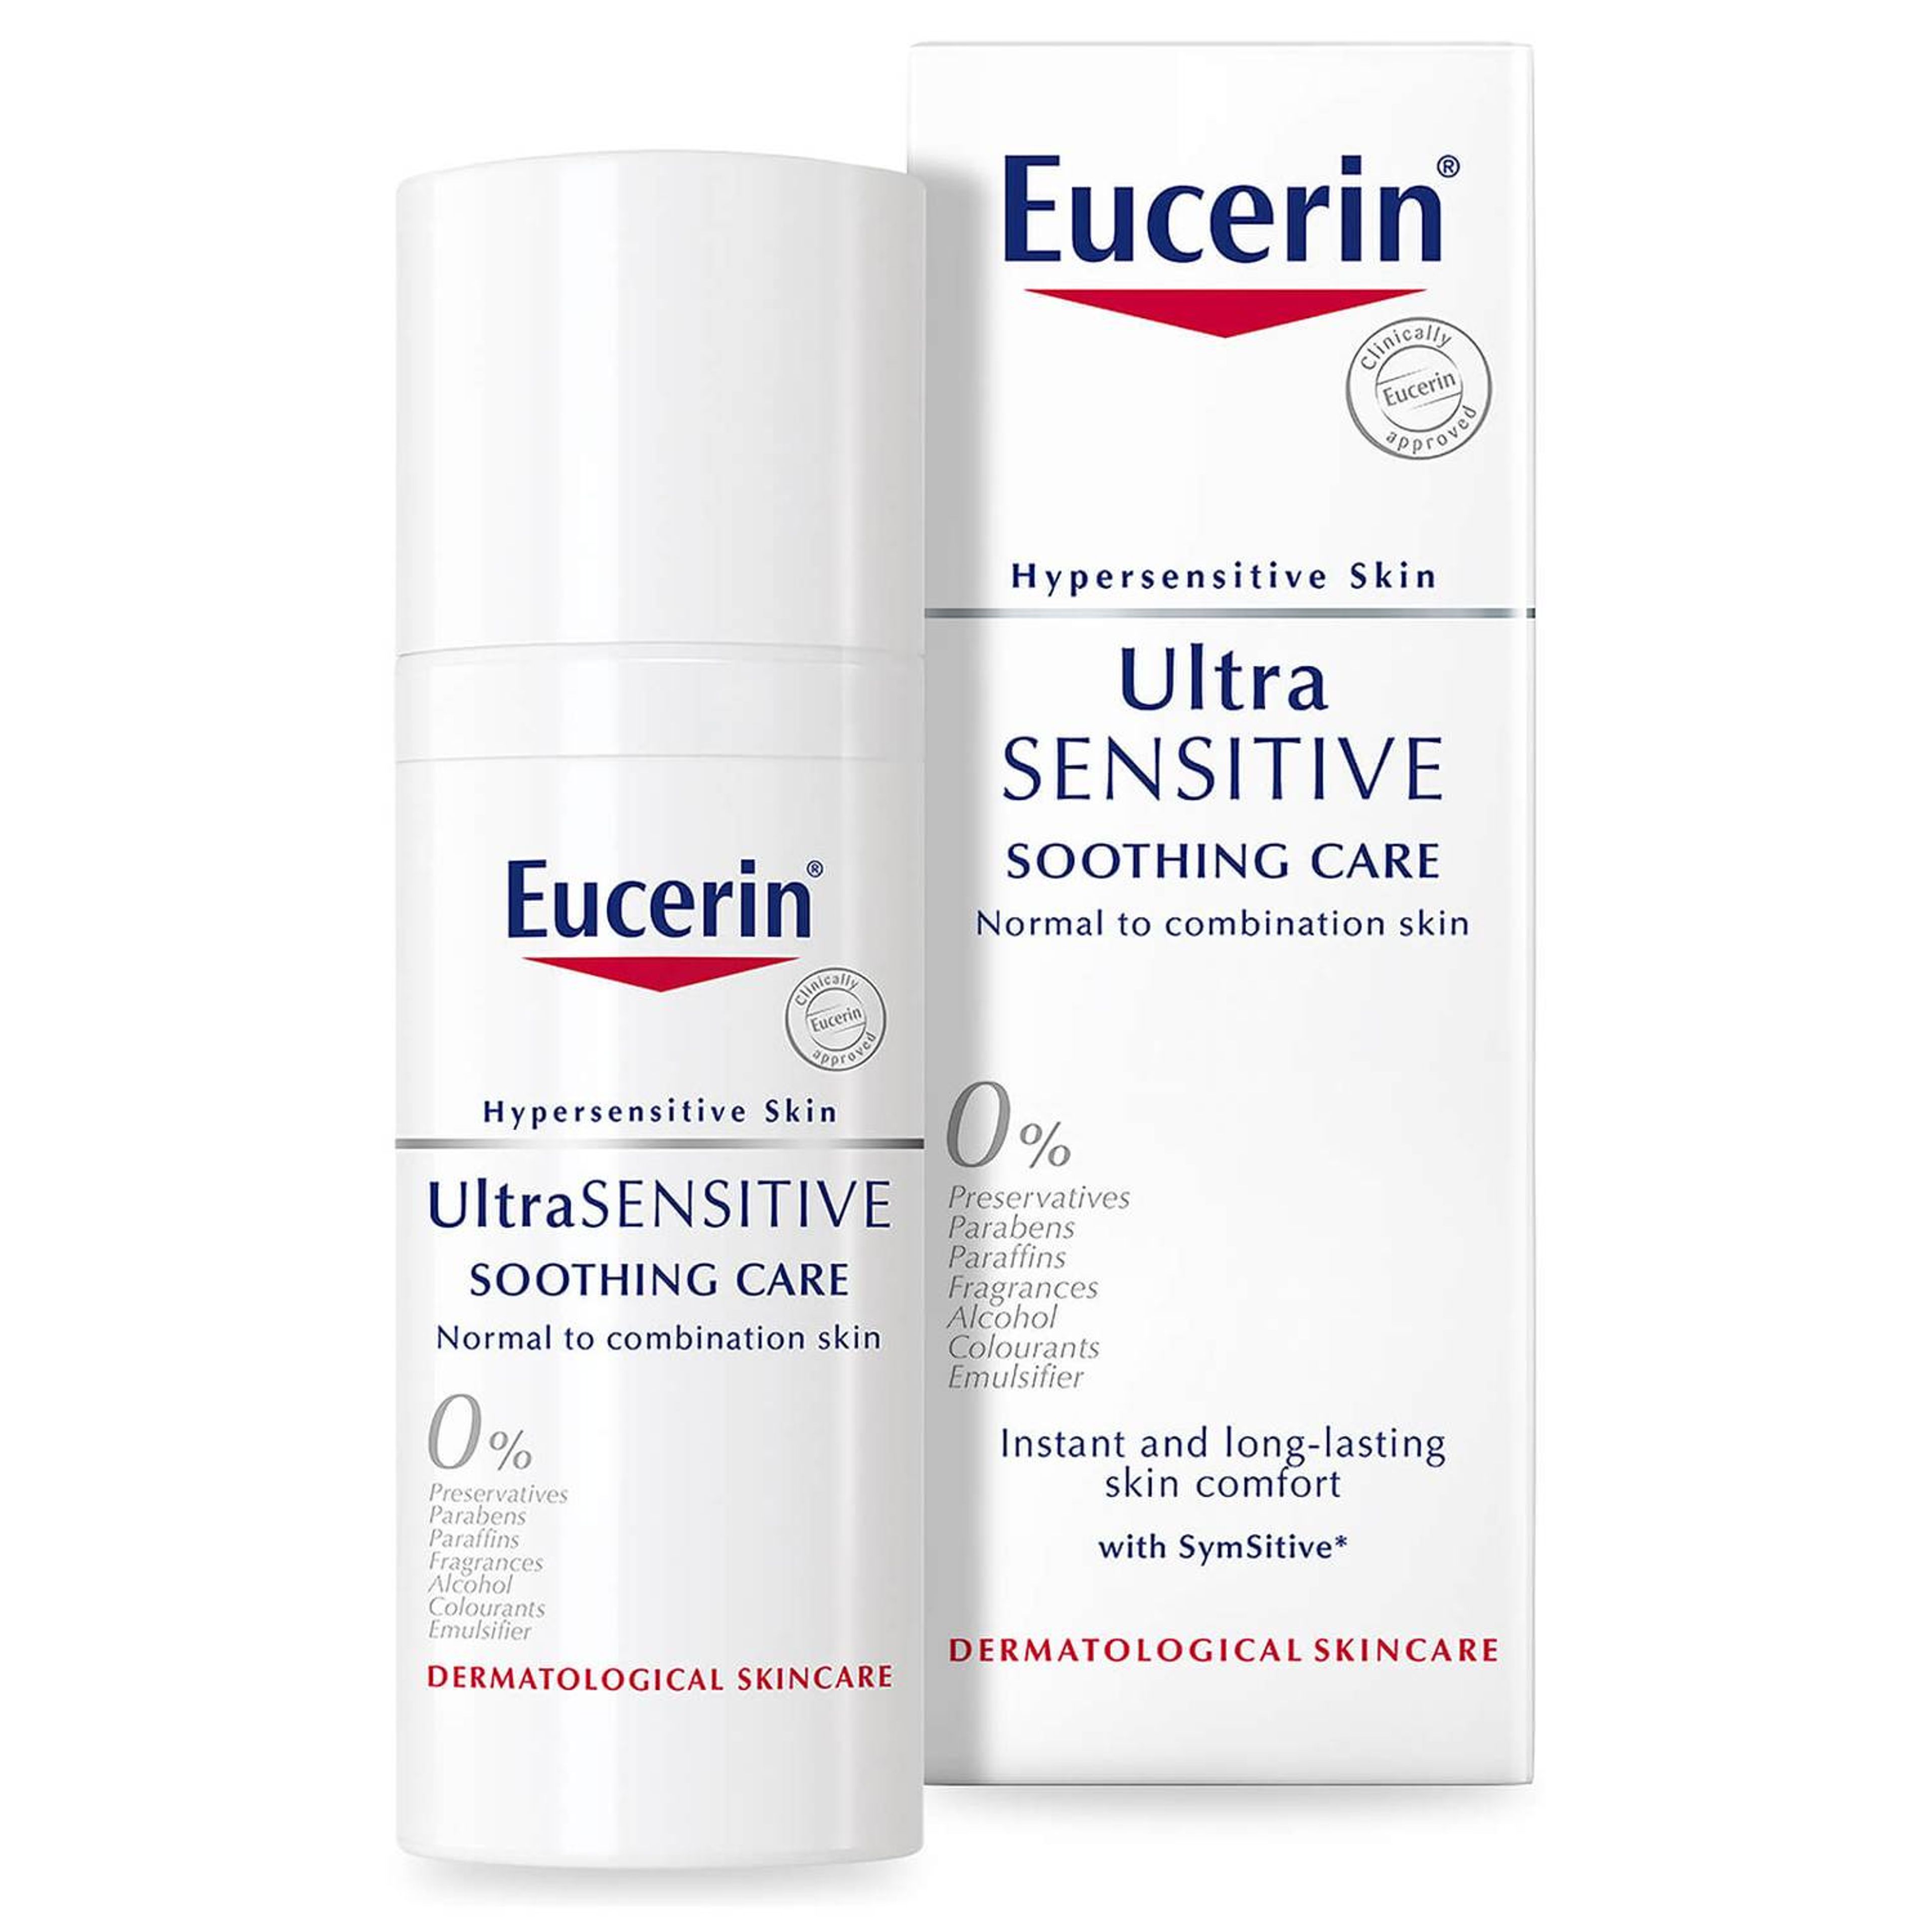  UltraSensitive Soothing Care (Dry Skin)